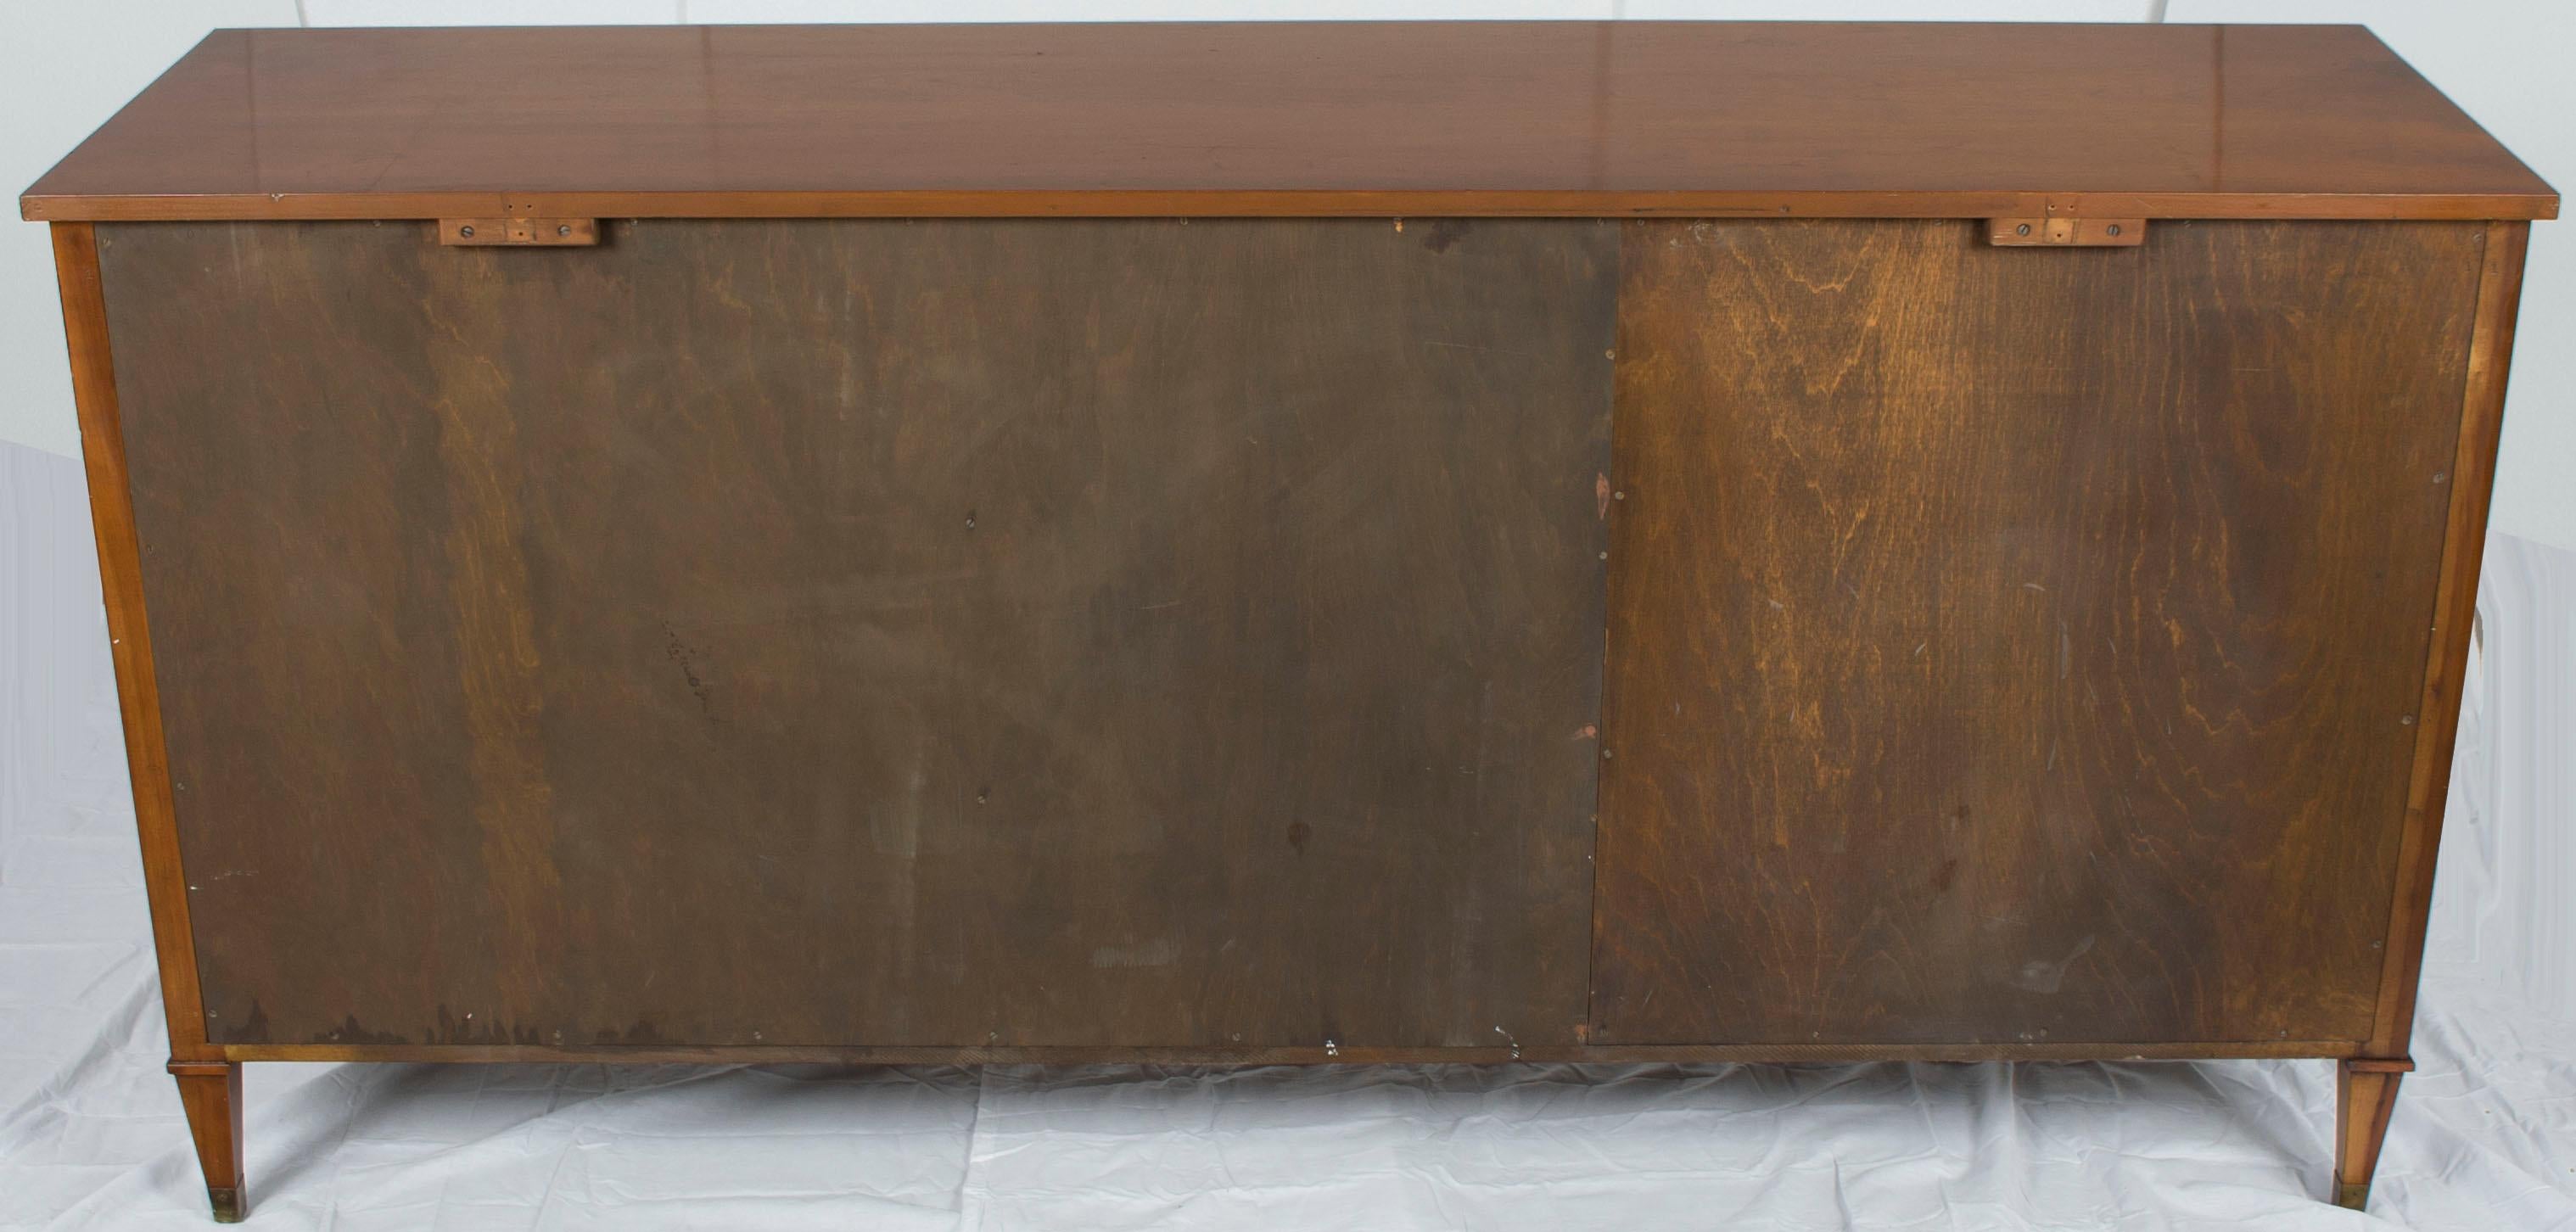 Directoire Style Mid-Century Modern Credenza Buffet Sideboard For Sale 5